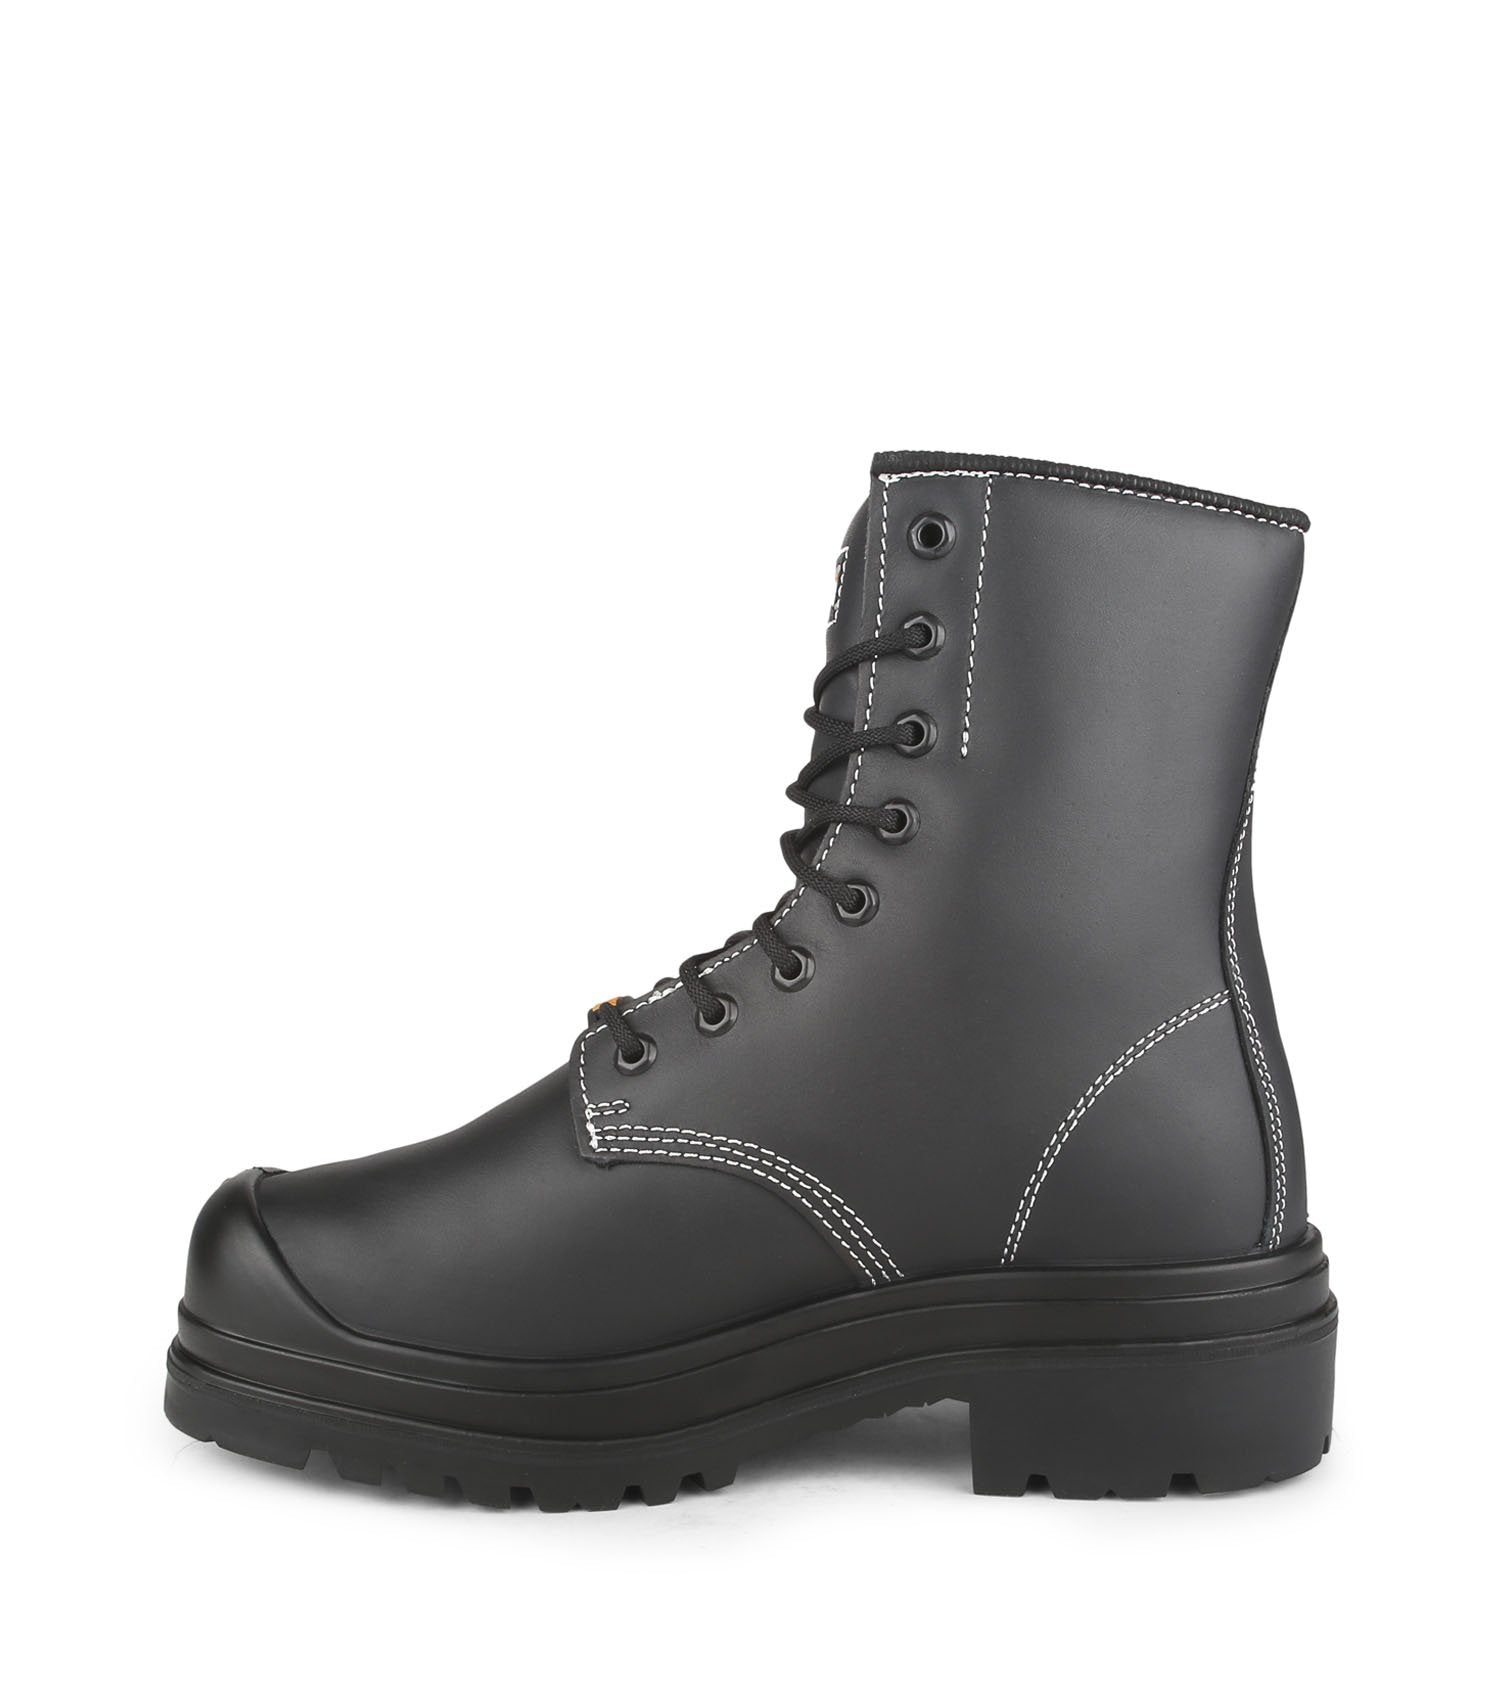 stc safety boots